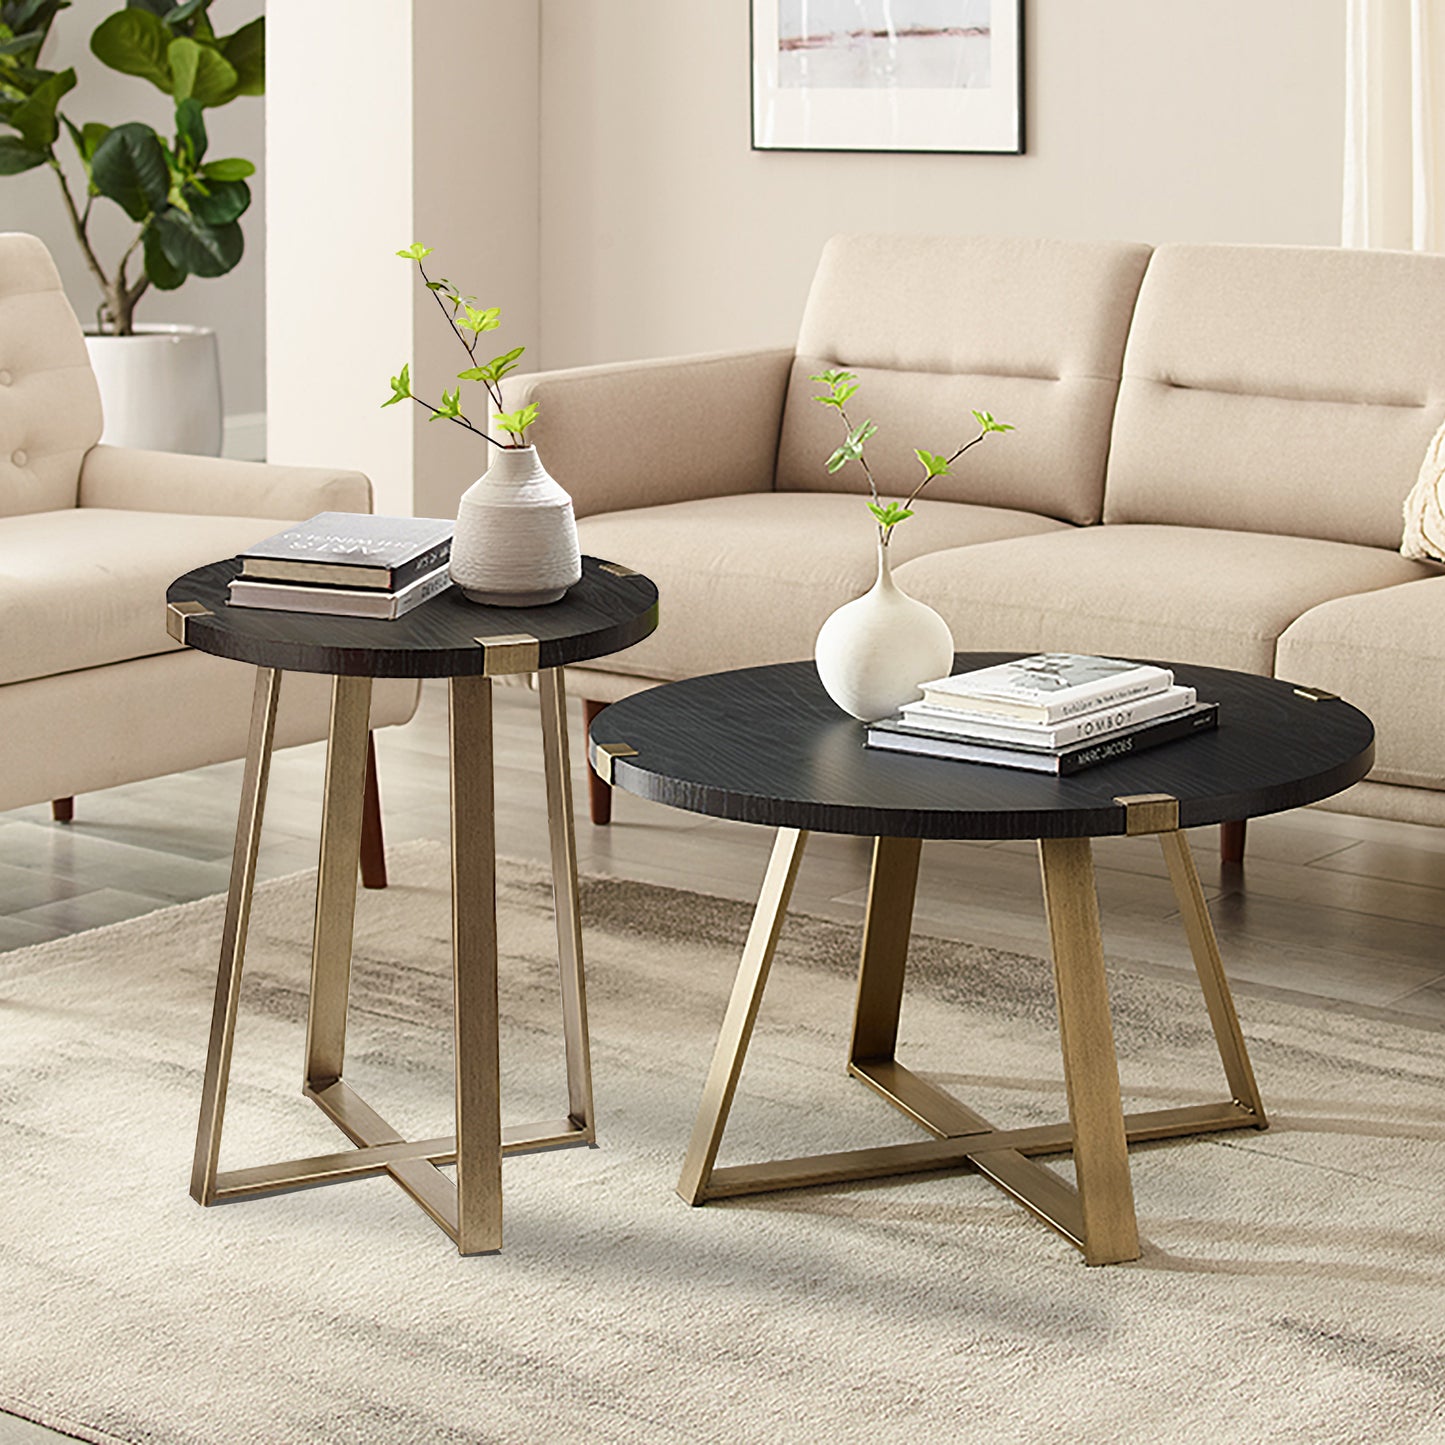 Criterion Capri Coffee Tables 770mm Round Table, Gold Metal Leg and Metal Highlights Black Oak